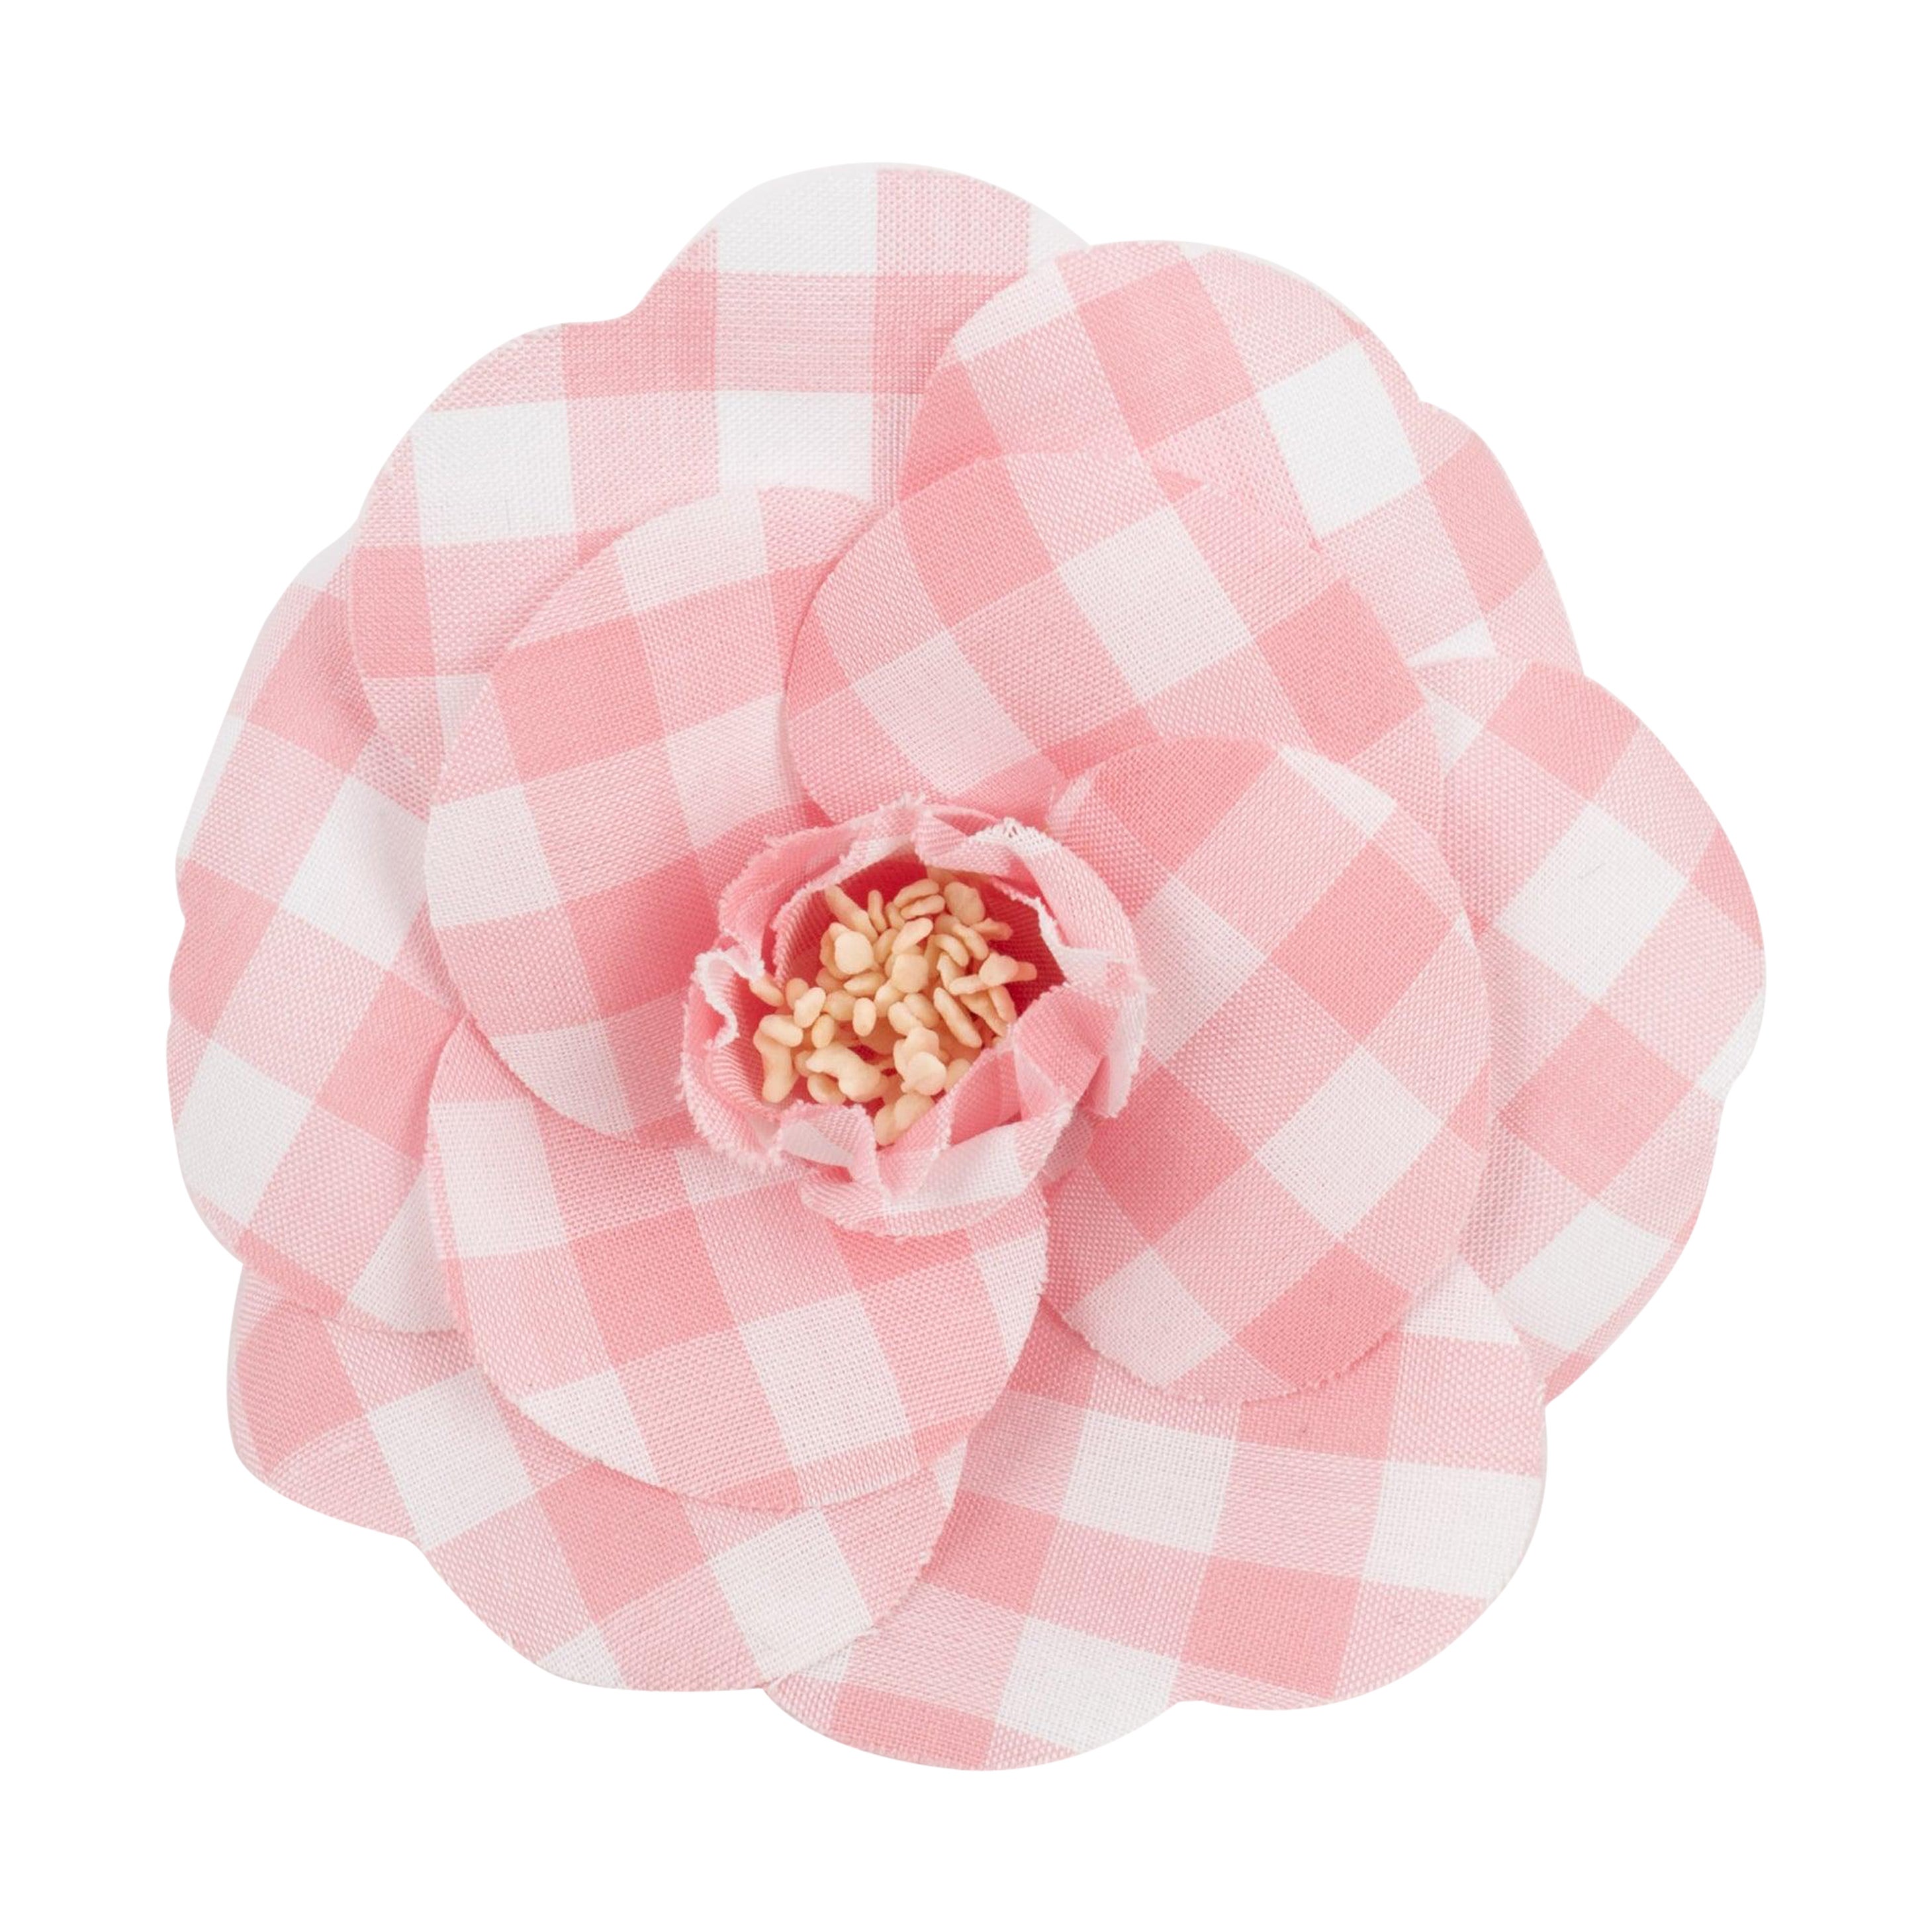 Chanel Brooch Camellia Made of Pink and White Gingham Fabric, 1990s